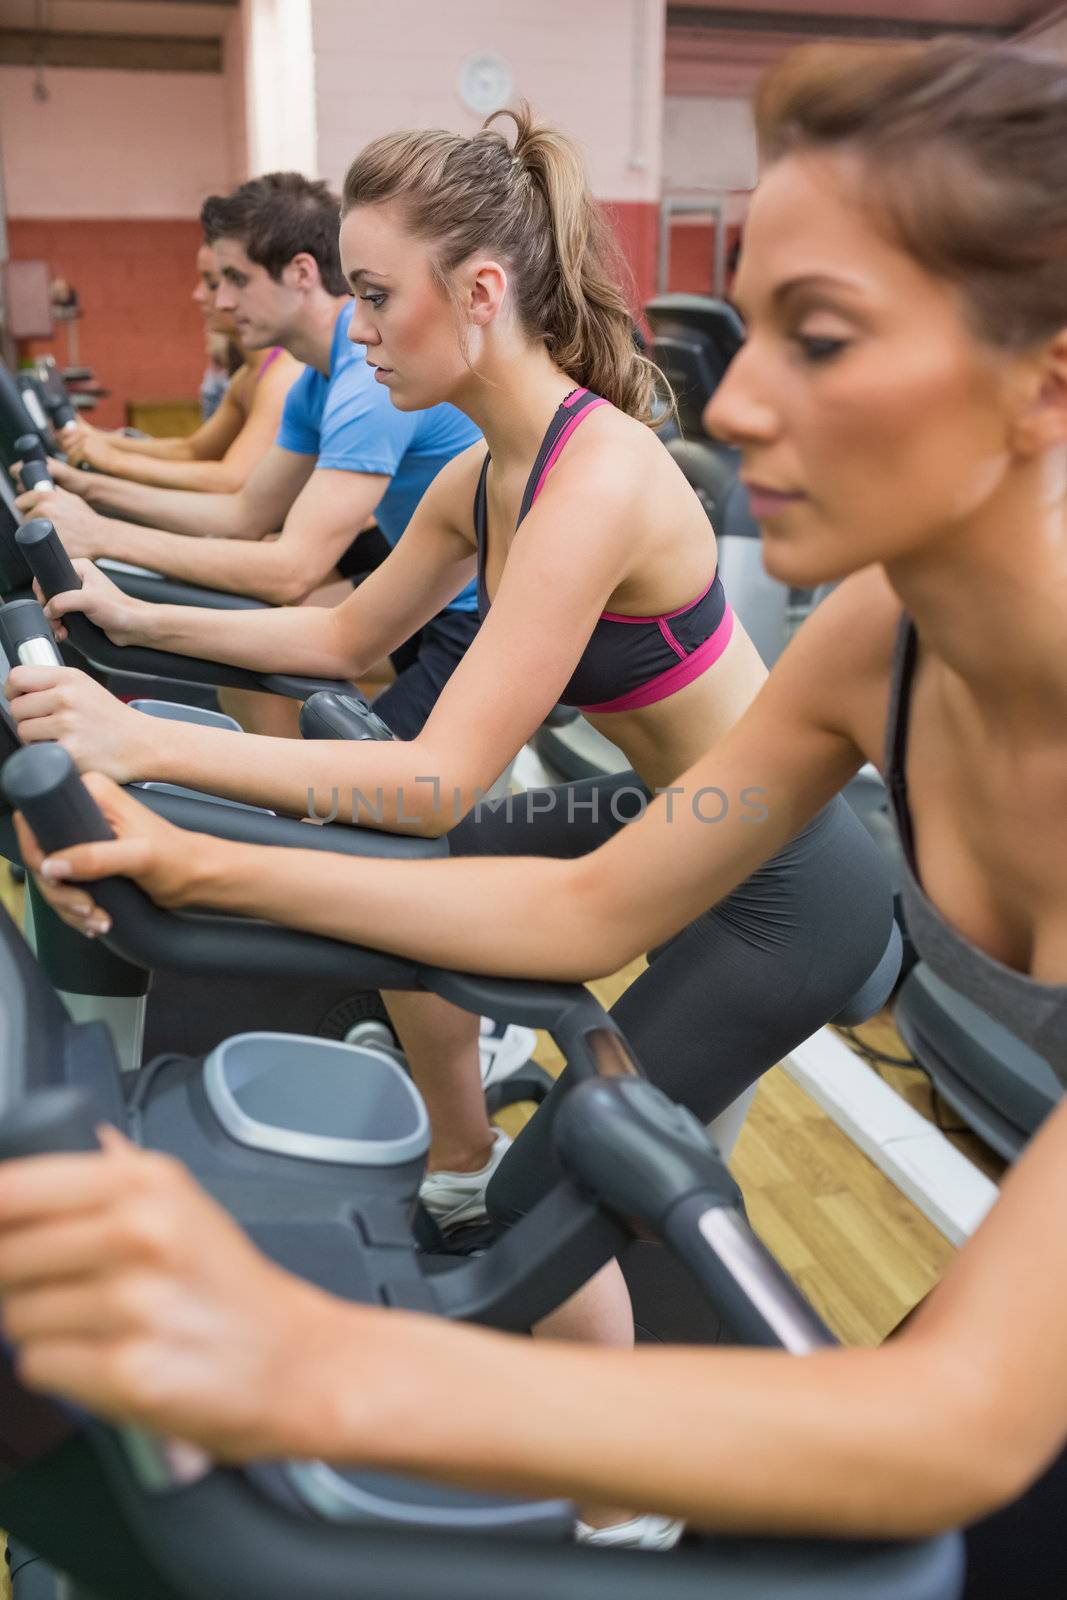 Four people on exercise bikes by Wavebreakmedia